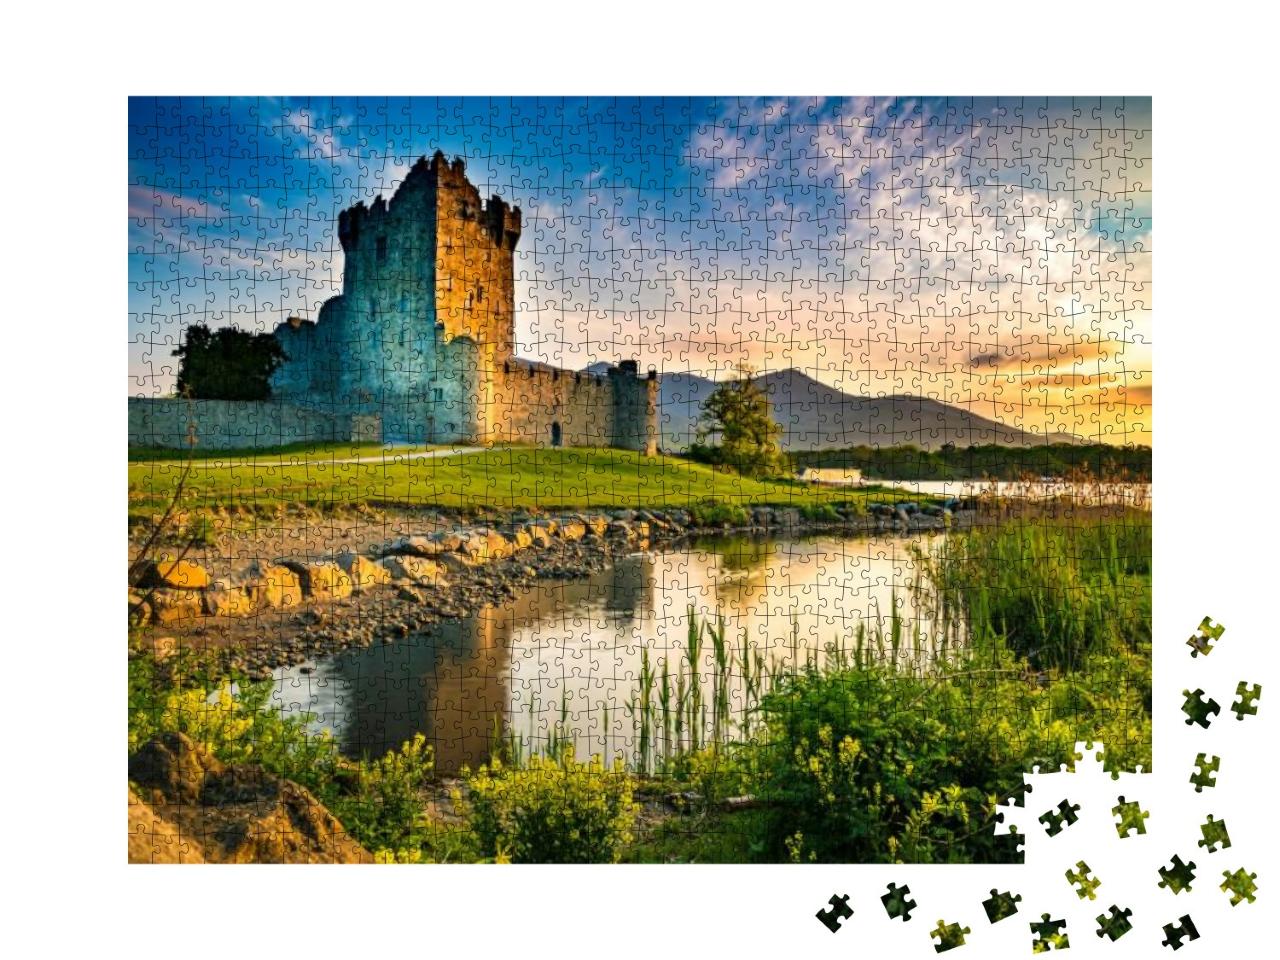 Puzzle 1000 Teile „Ross Castle, antike Festung in Irland“